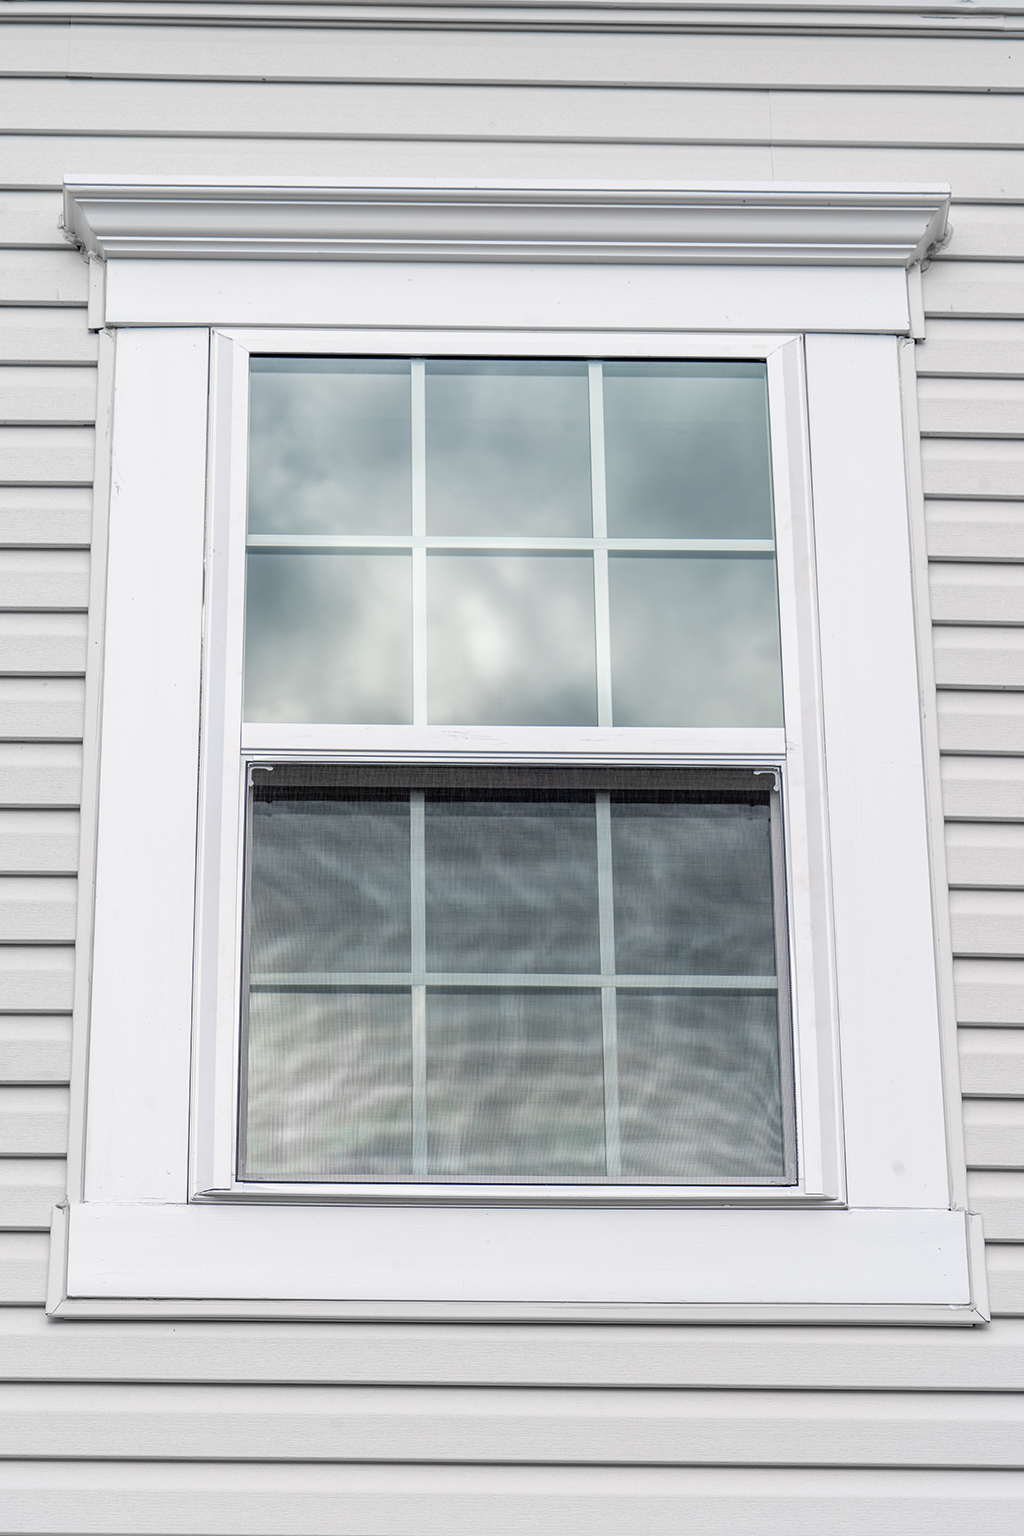 Choosing the Right Energy Efficient Windows: Double-hung vs. Sliders | Dallas, TX